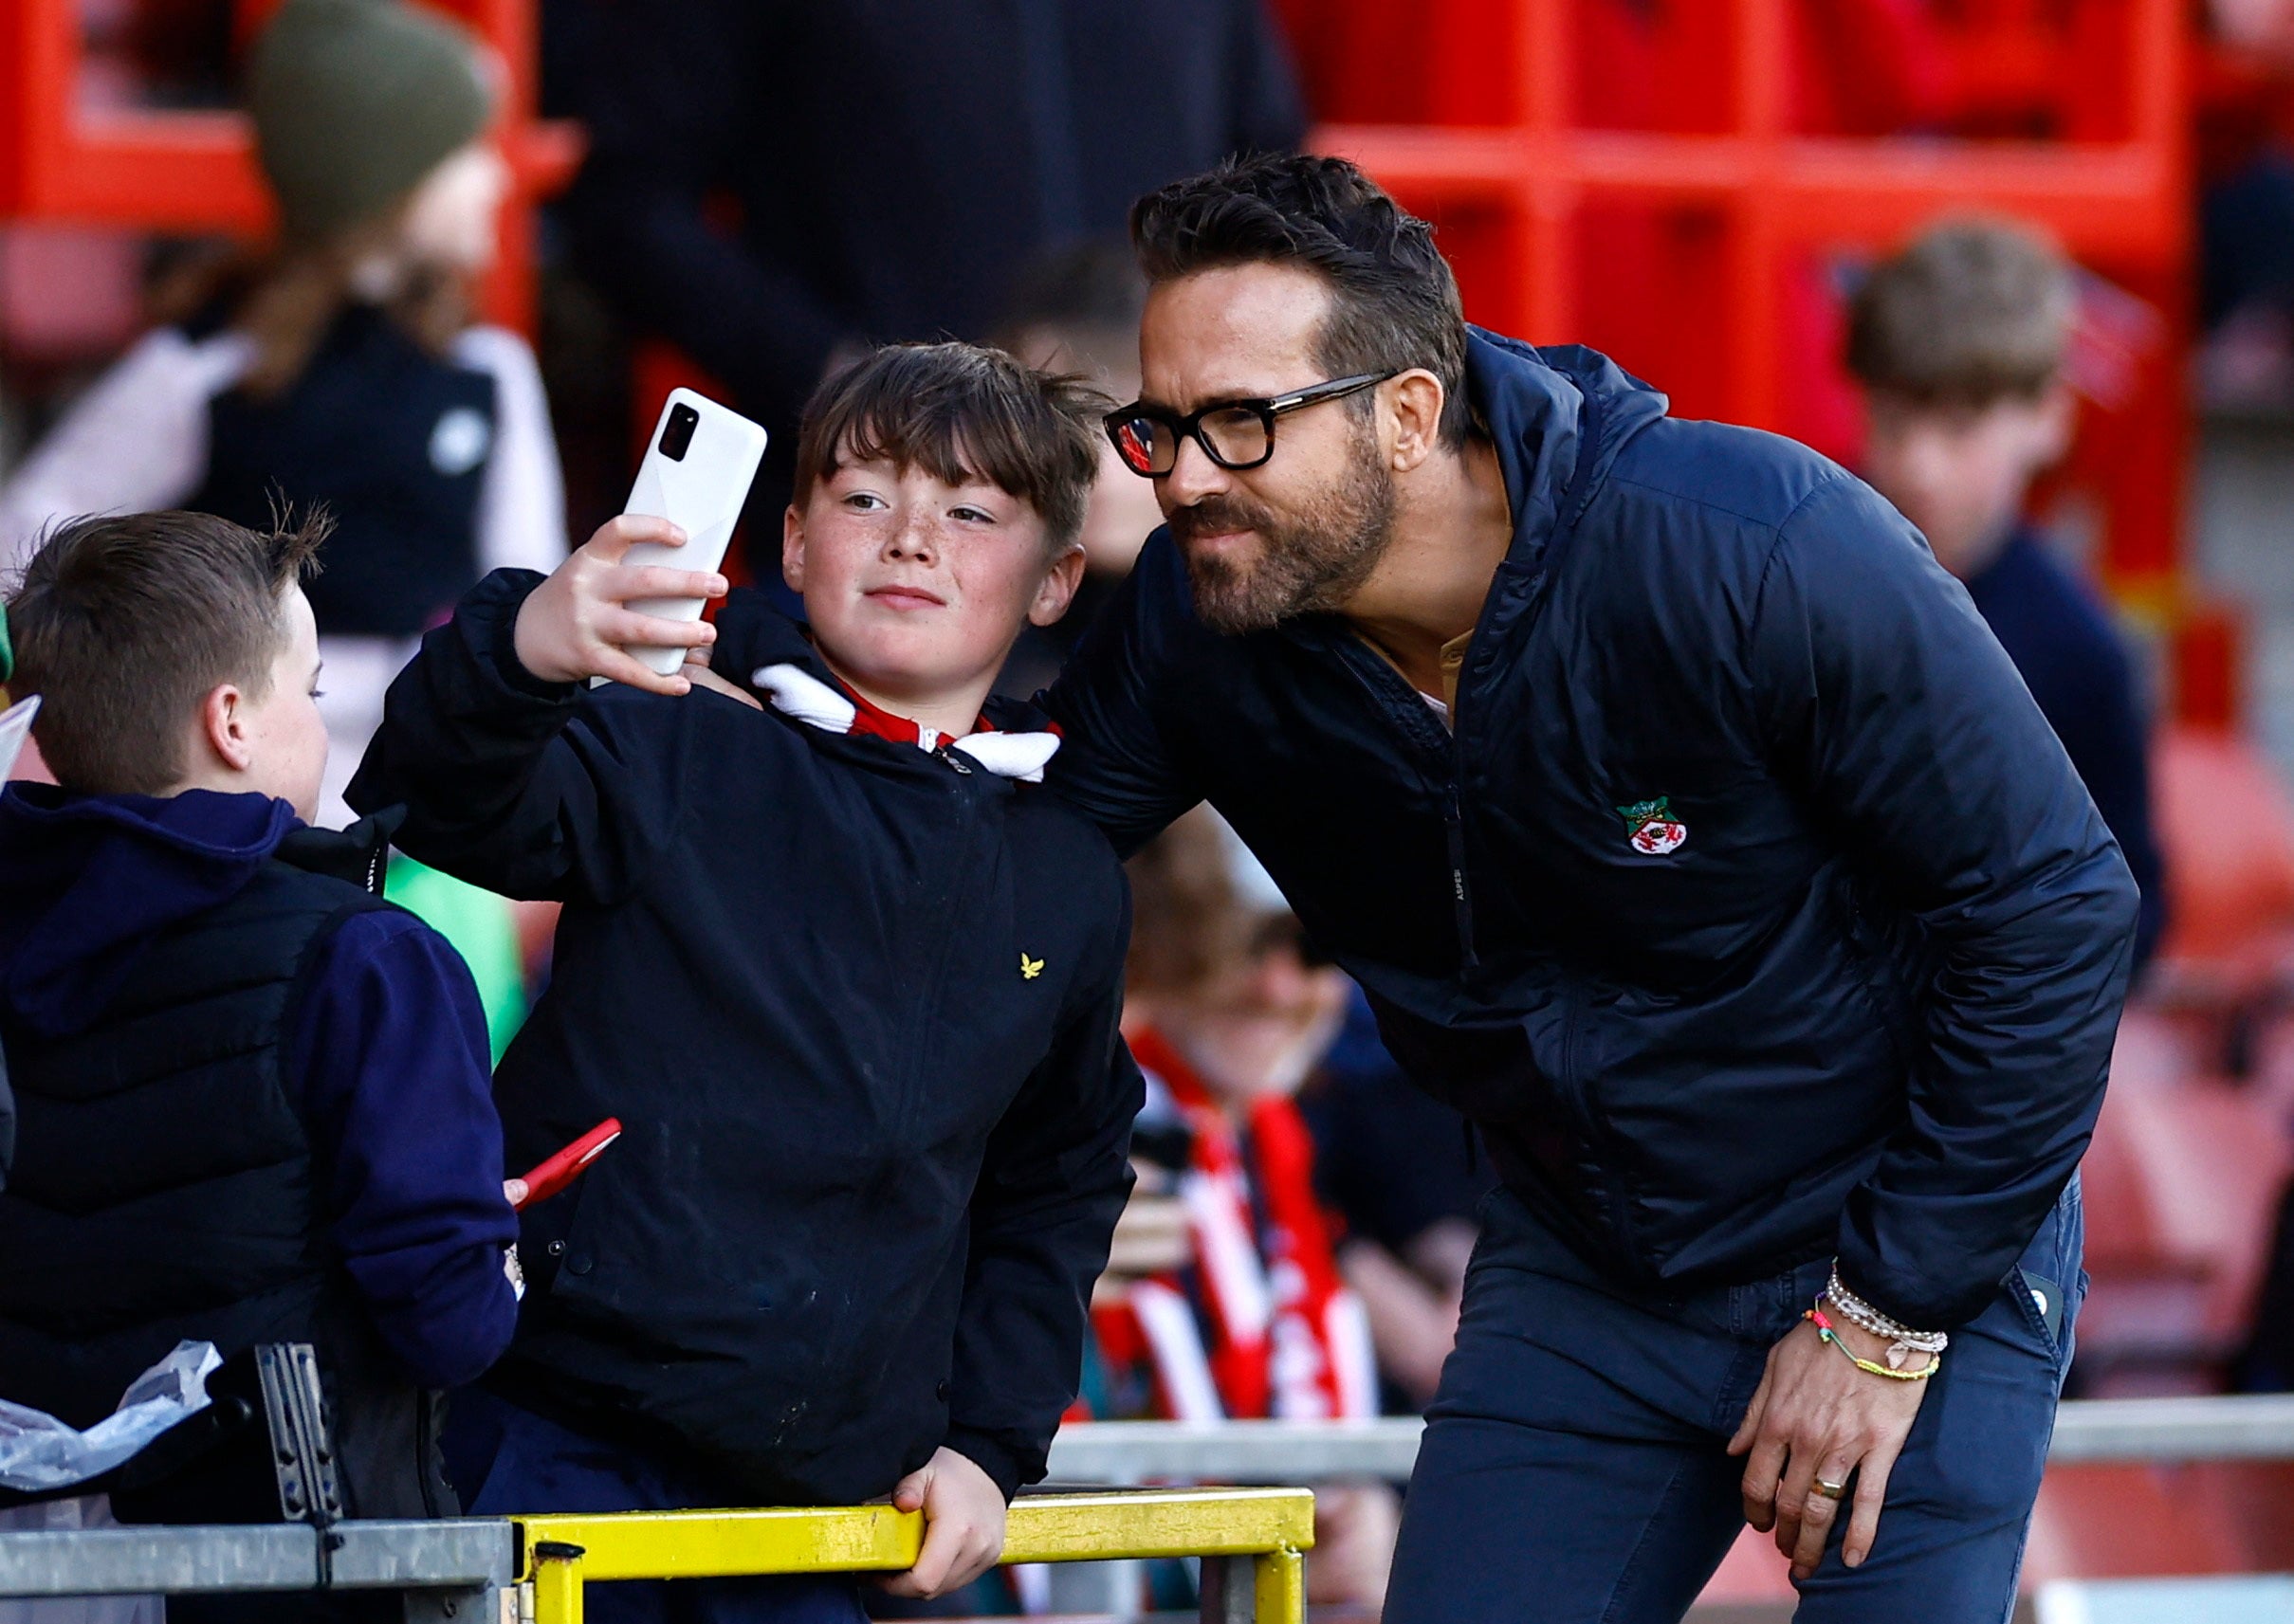 Ryan Reynolds poses for a selfie with a young Wrexham fan